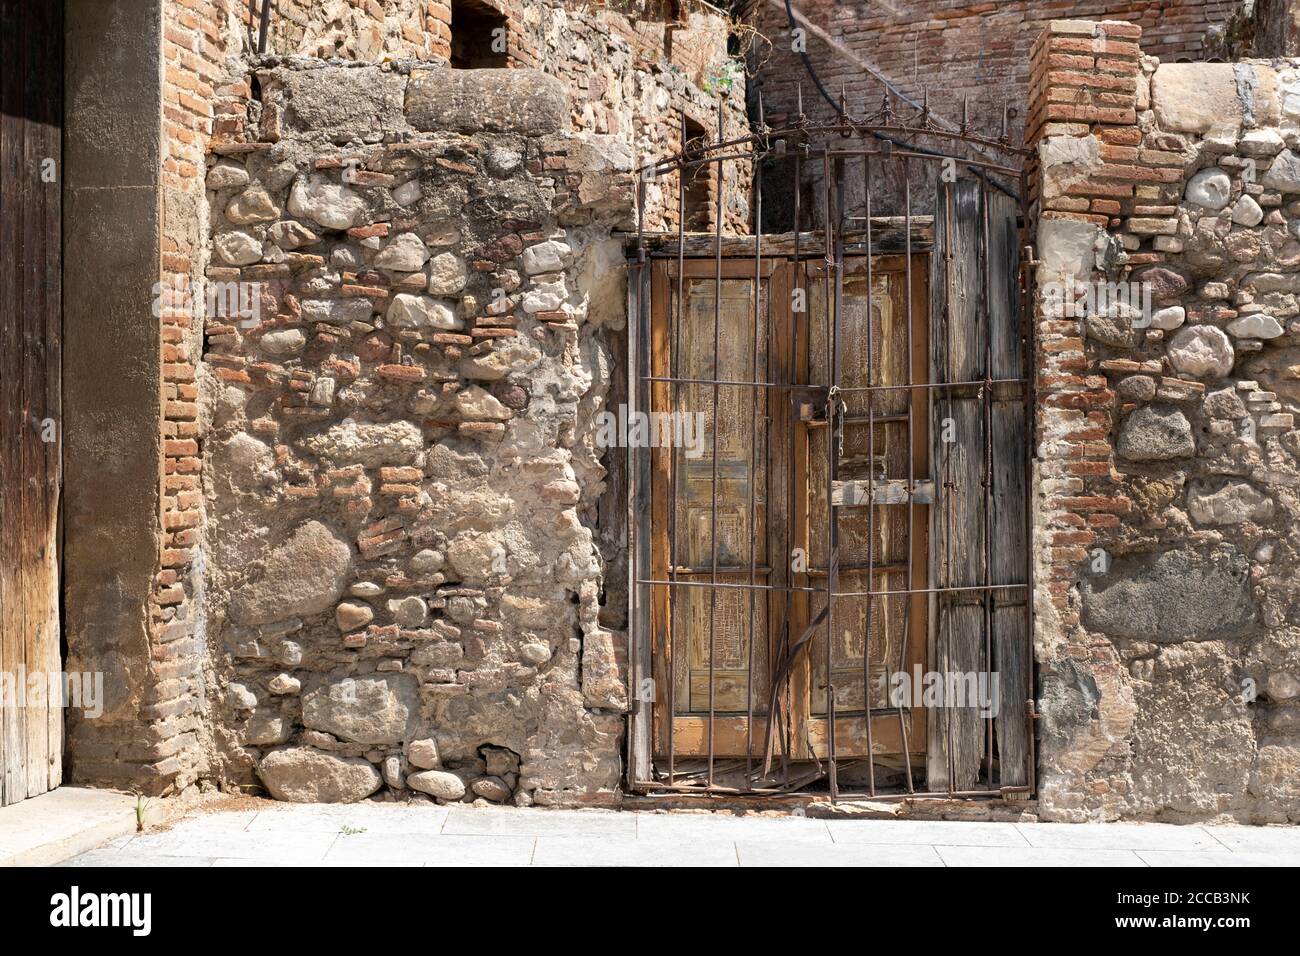 Stone wall in a rural building and a damaged old wooden door. Travel destination background in Spain, Mediterranean and South Europe country. Stock Photo